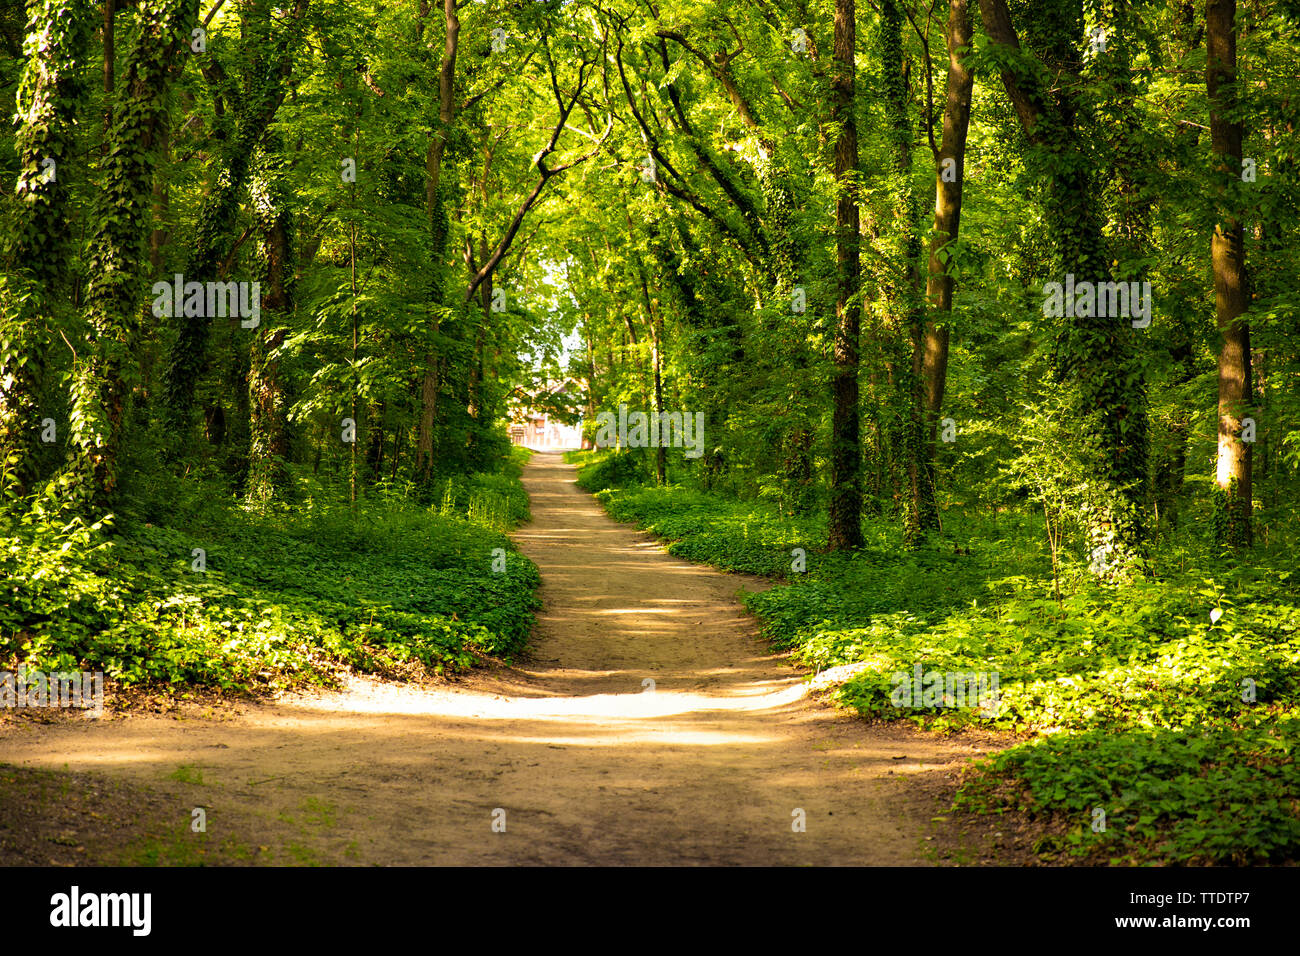 forest, path, nature, landscape, tree, green, road, trail, beautiful, love, outdoor, child, environment, summer, home, family, background, meadow, hea Stock Photo